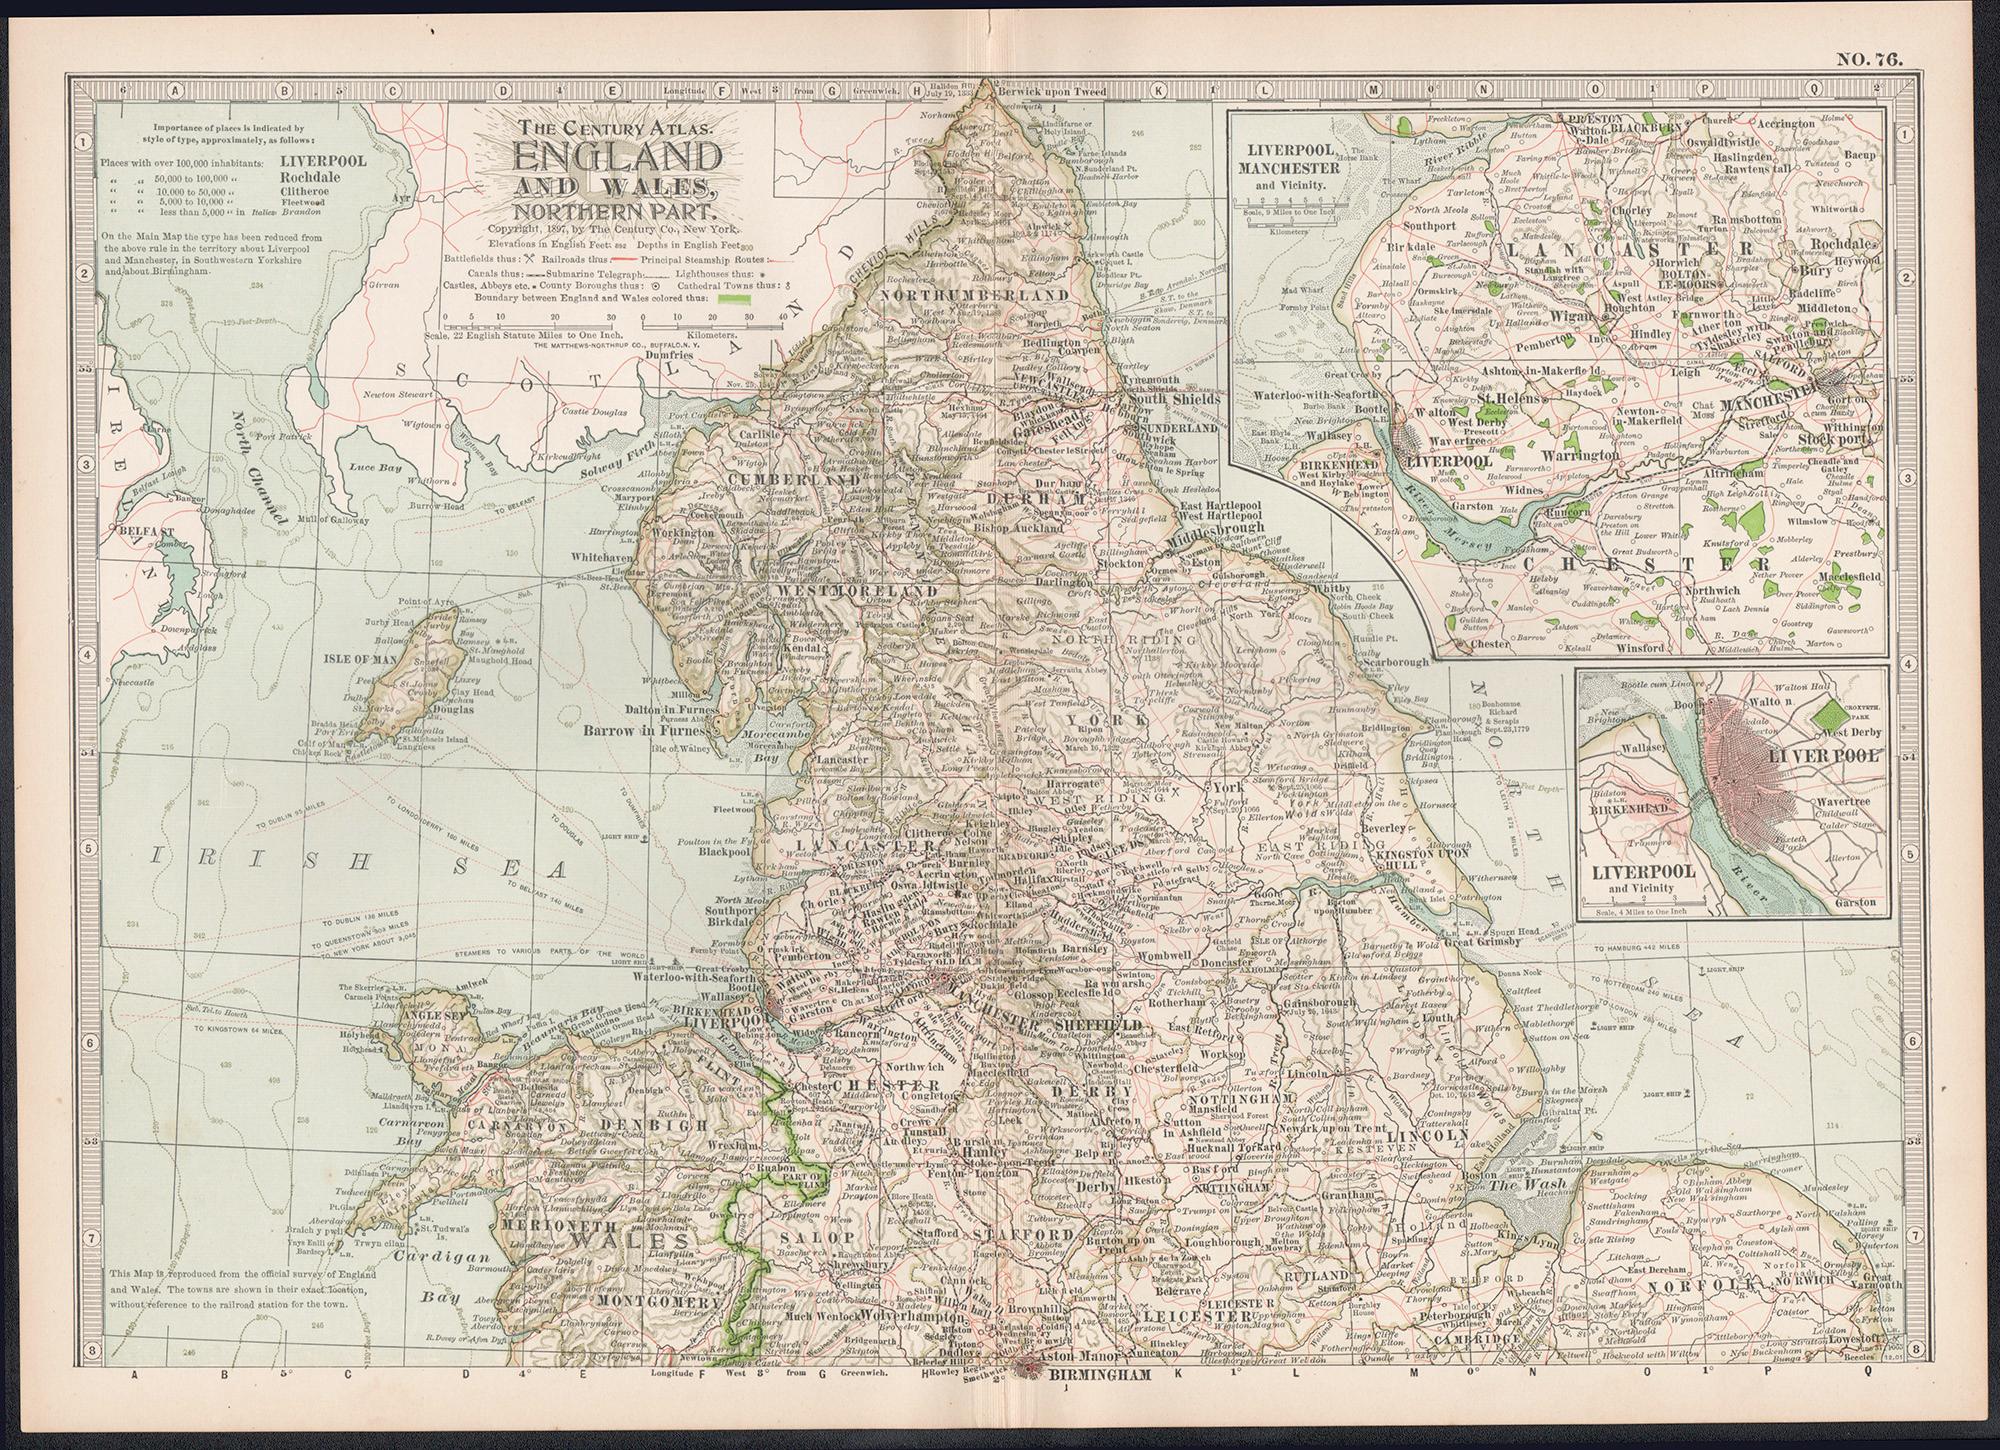 England and Wales, Northern Part. Century Atlas antique vintage map - Print by Unknown